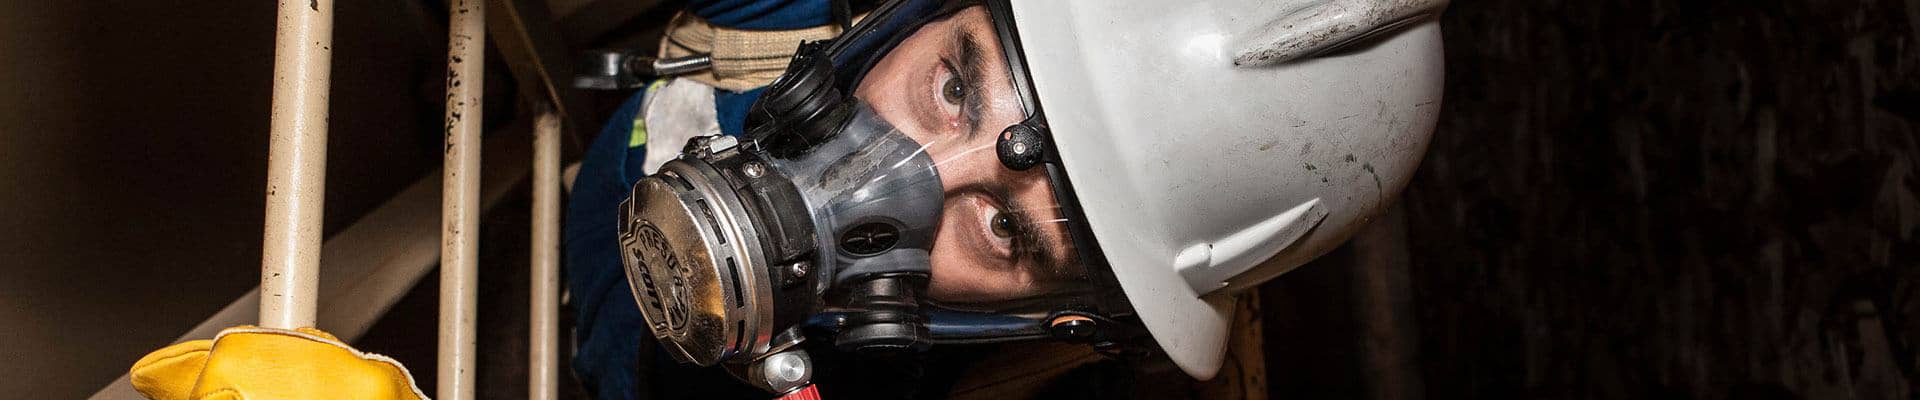 Man doing confined space training